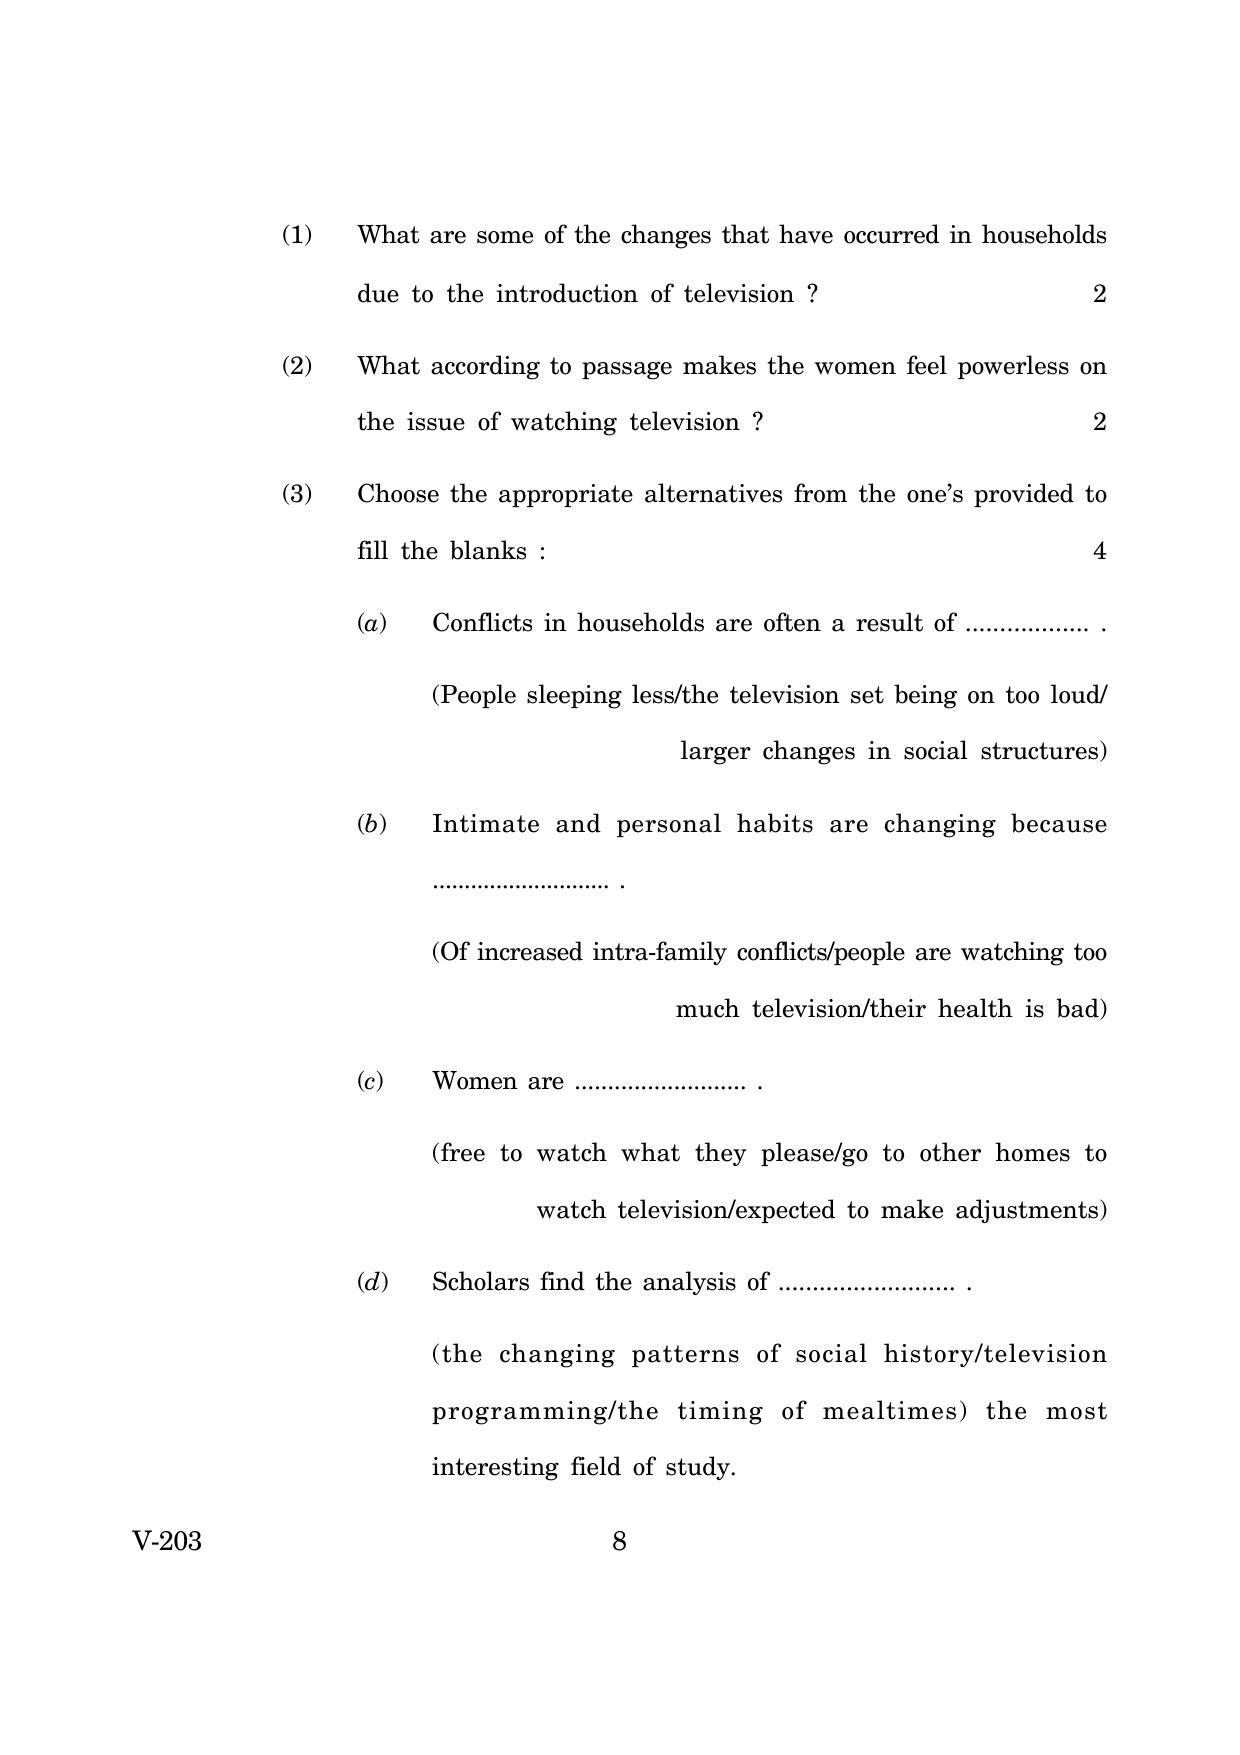 Goa Board Class 12 English Communication Skills  2019_0 (March 2019_0) Question Paper - Page 8